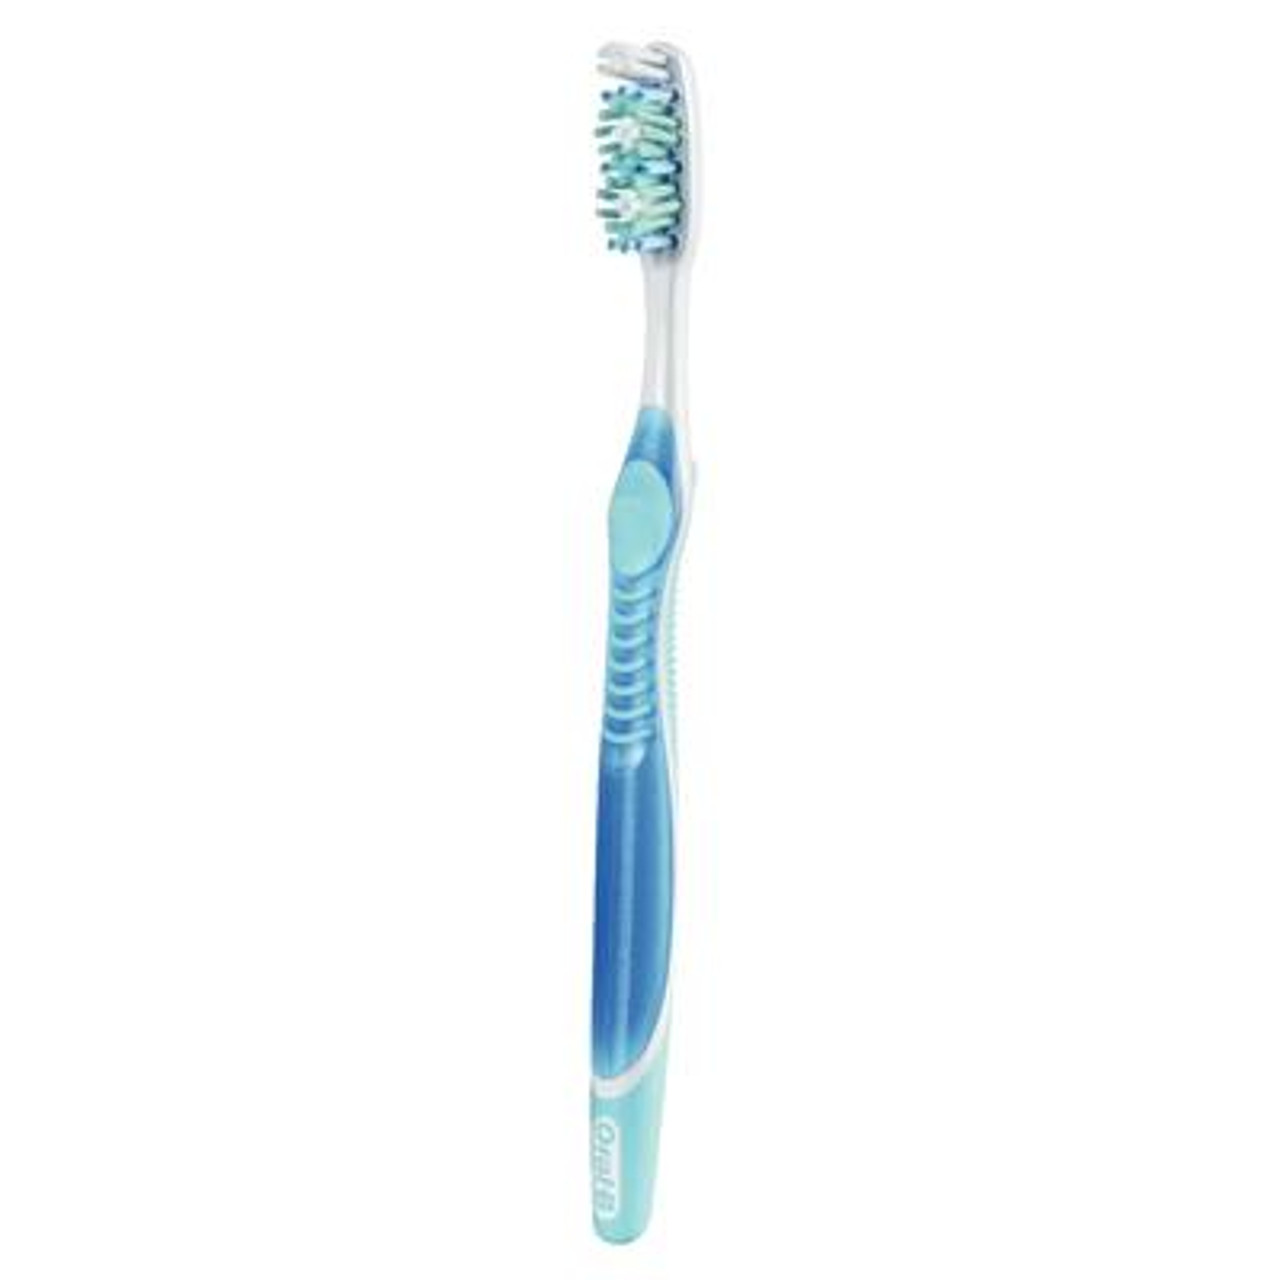 P&G Oral-B Toothbrush Complete 3D White Vivid 35 Soft, 4 Colors: Mint, Violet, Lime Green & Blue, 12/bx (old part #s 80243768, 80250652, 80245317, 80230347, 84858119)